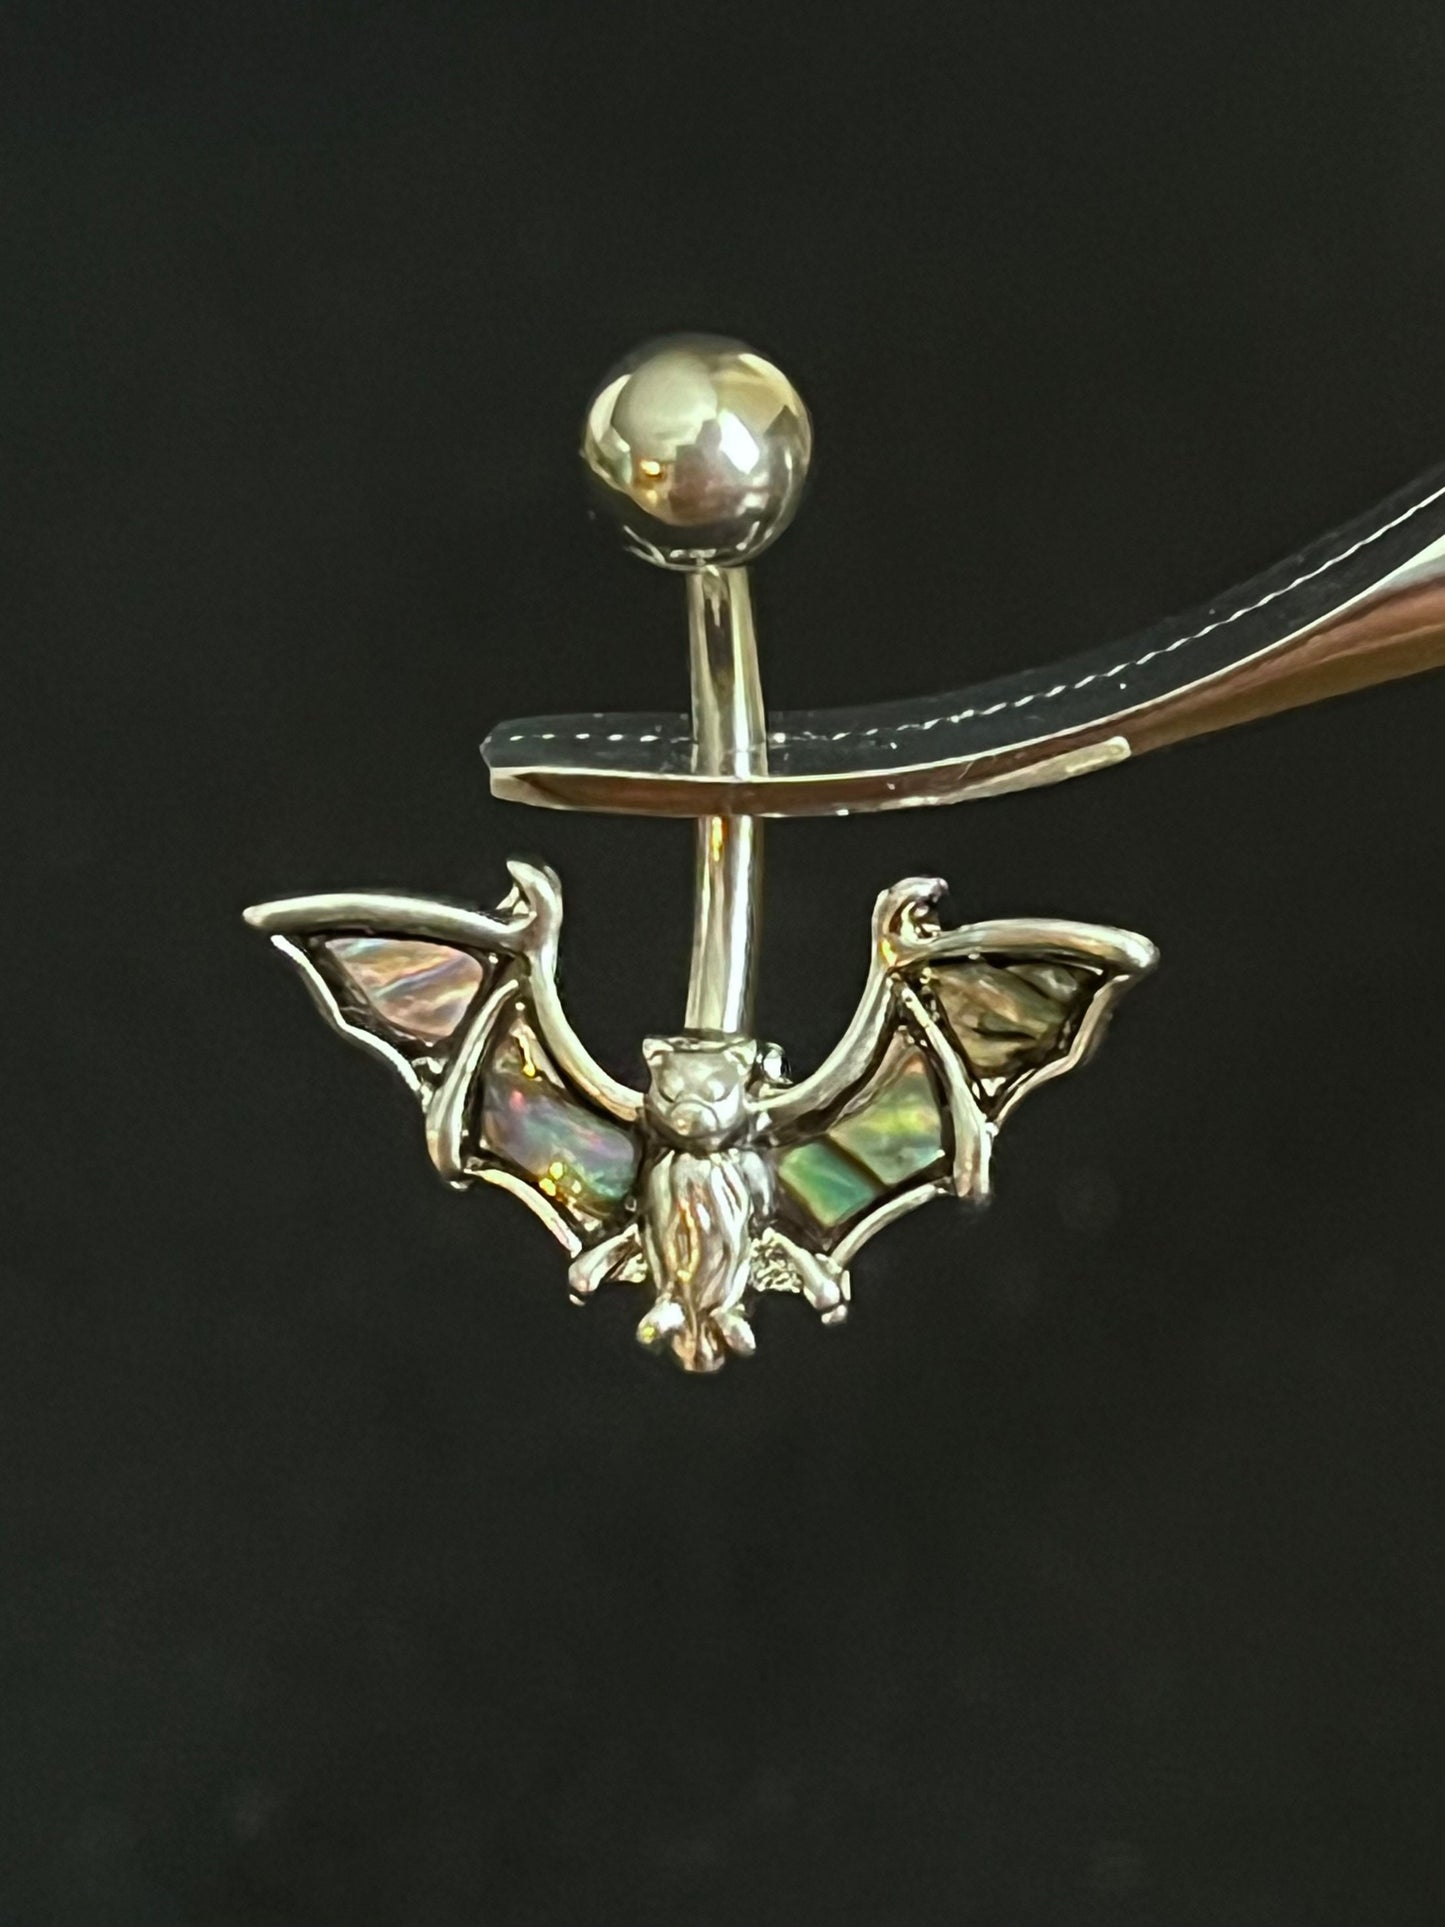 1 Piece Unique Abalone Shell Bat Navel / Naval Belly Button Ring - 14g - 10mm - Black and Silver Available!